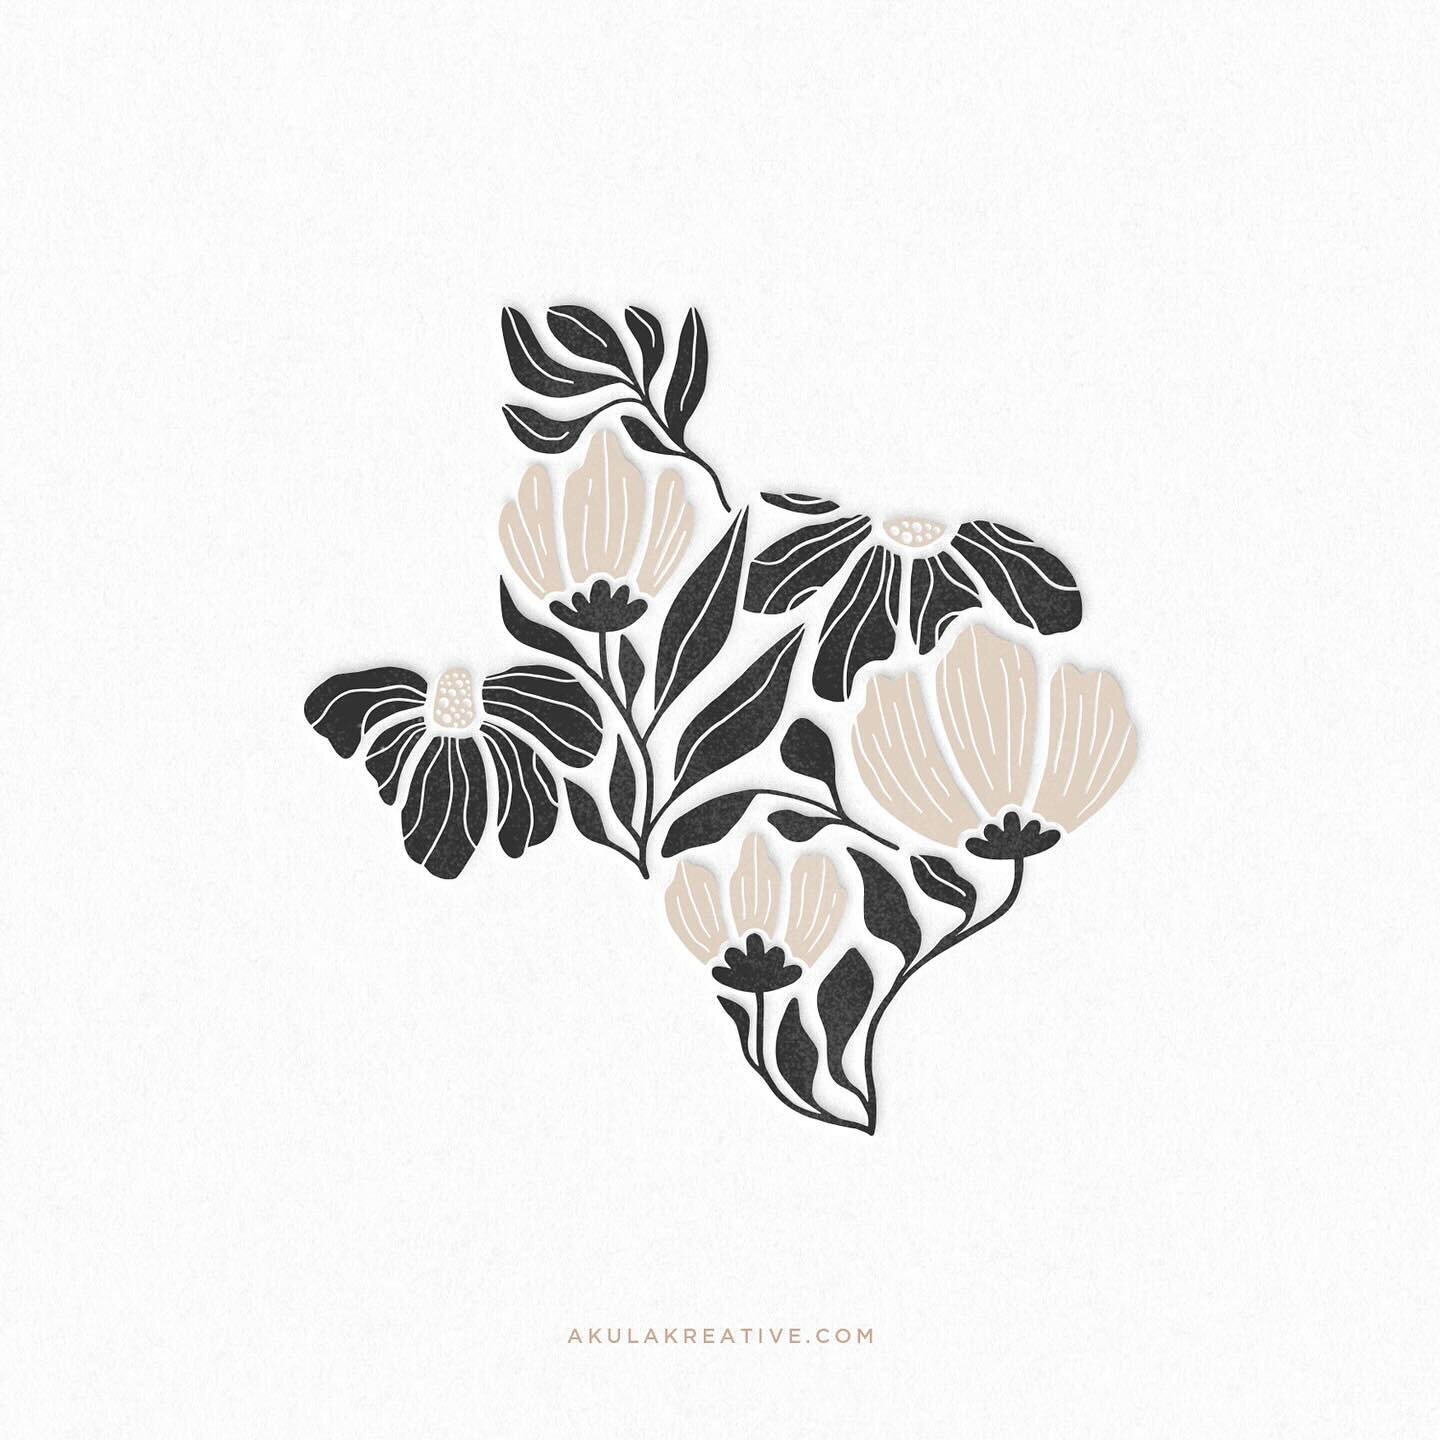 Currently working on :: everything TEXAS! 🤠 I&rsquo;ve drawn dozens of Texas-related florals in the past few weeks and it&rsquo;s been so fun! This one is part of a t-shirt design that&rsquo;s pending approval. 🤞🏽 Anyone else think it would make t